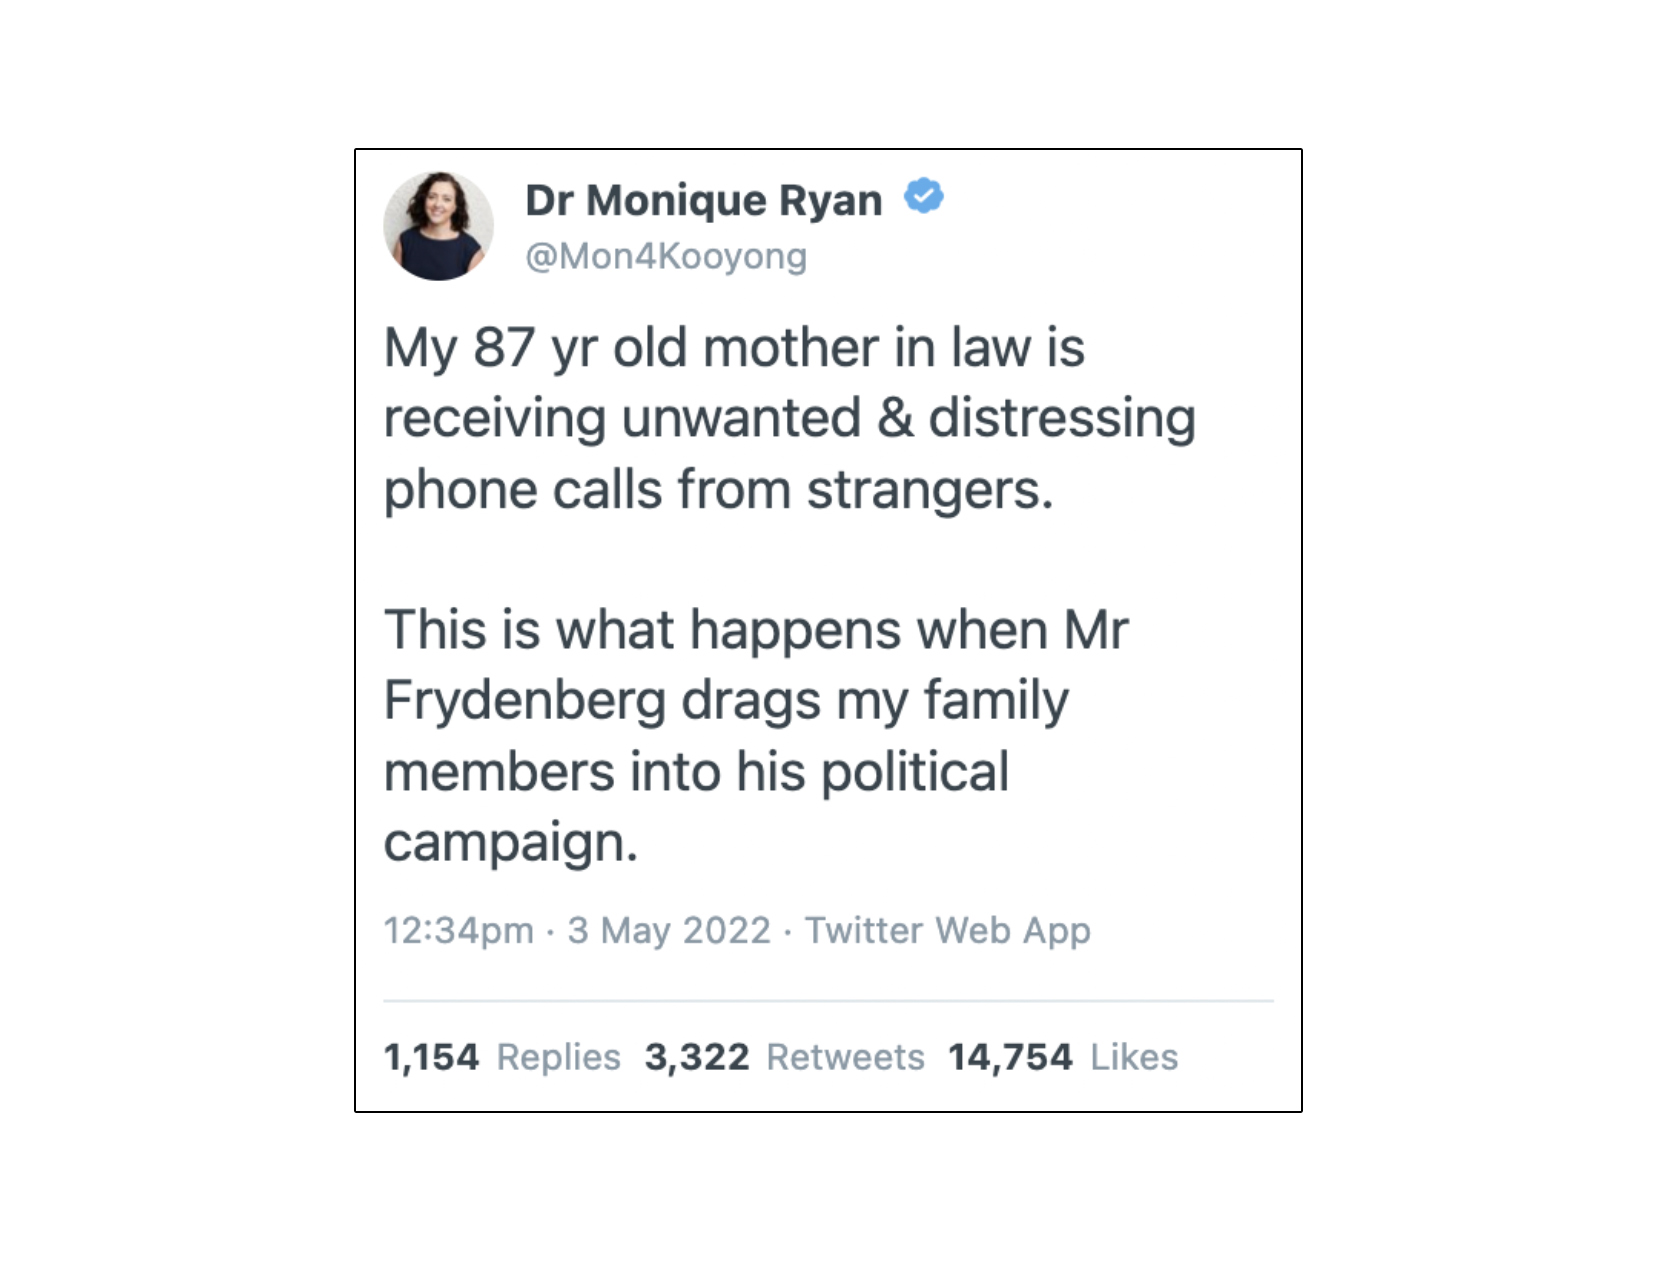 A Twitter post from Monique Ryan where she says her elderly mother in law is receiving unwanted and distressing phone calls because of the Treasurer.